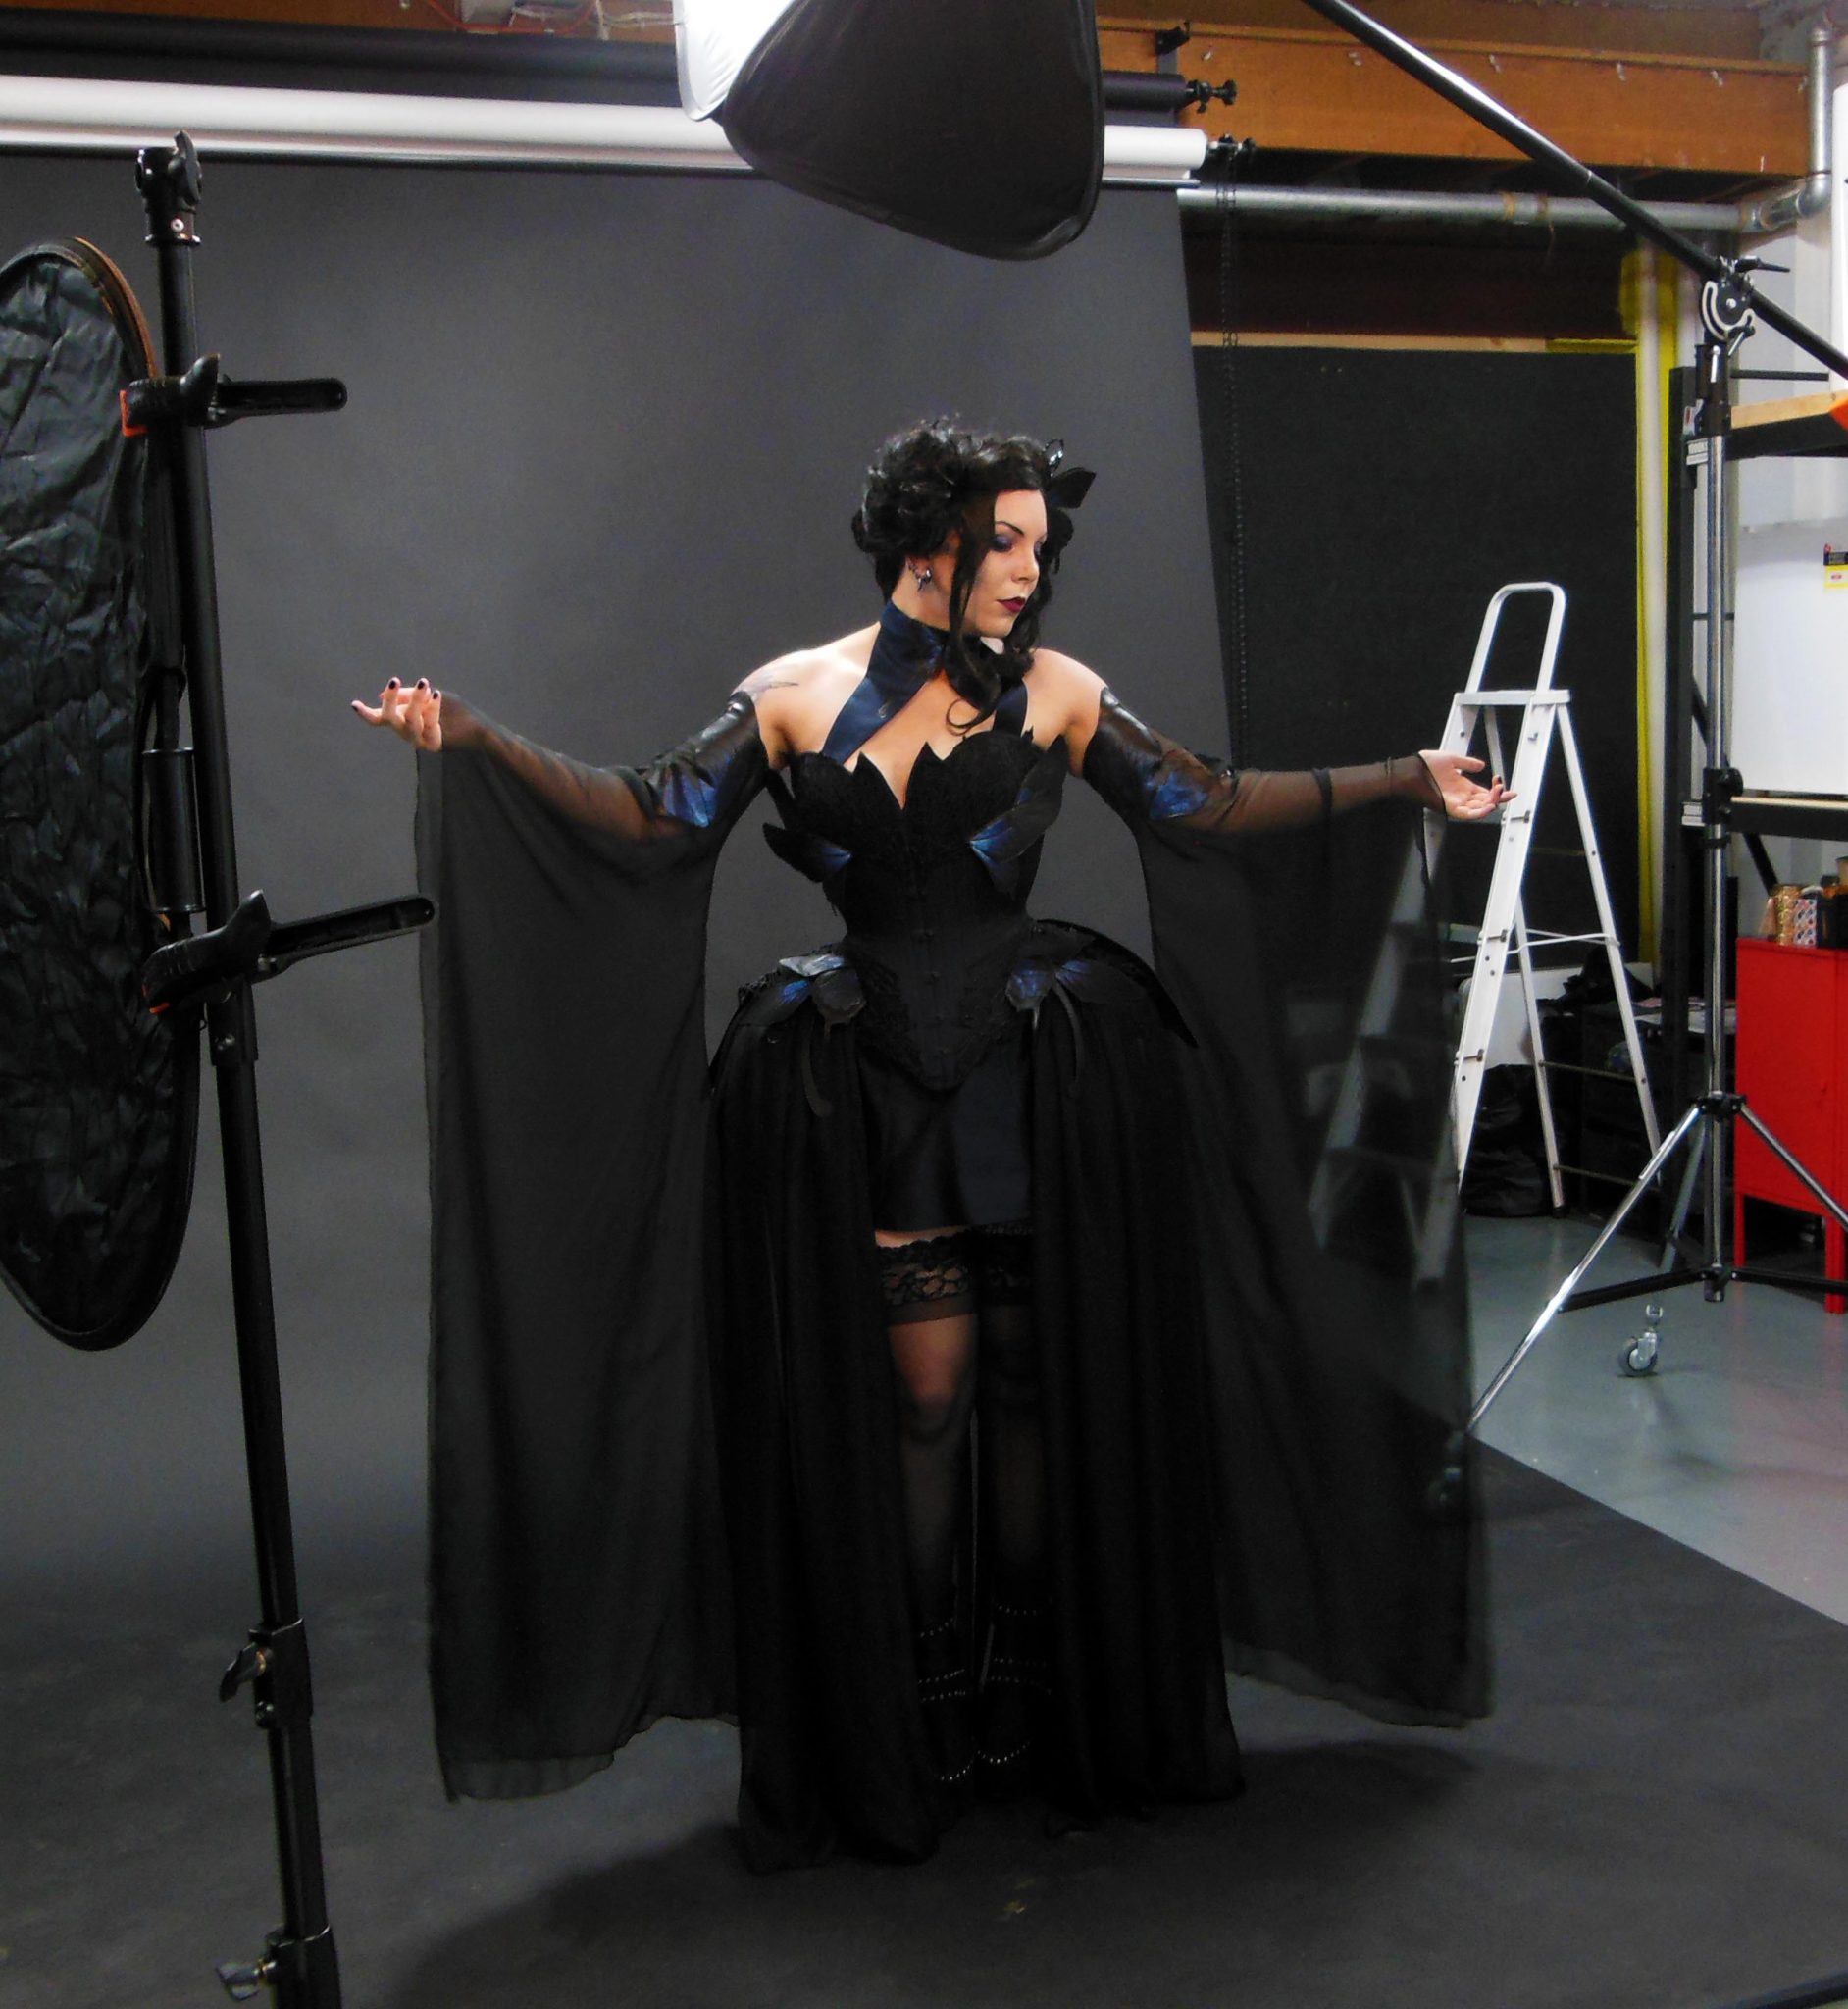 Behind the scenes with Miss Twisted